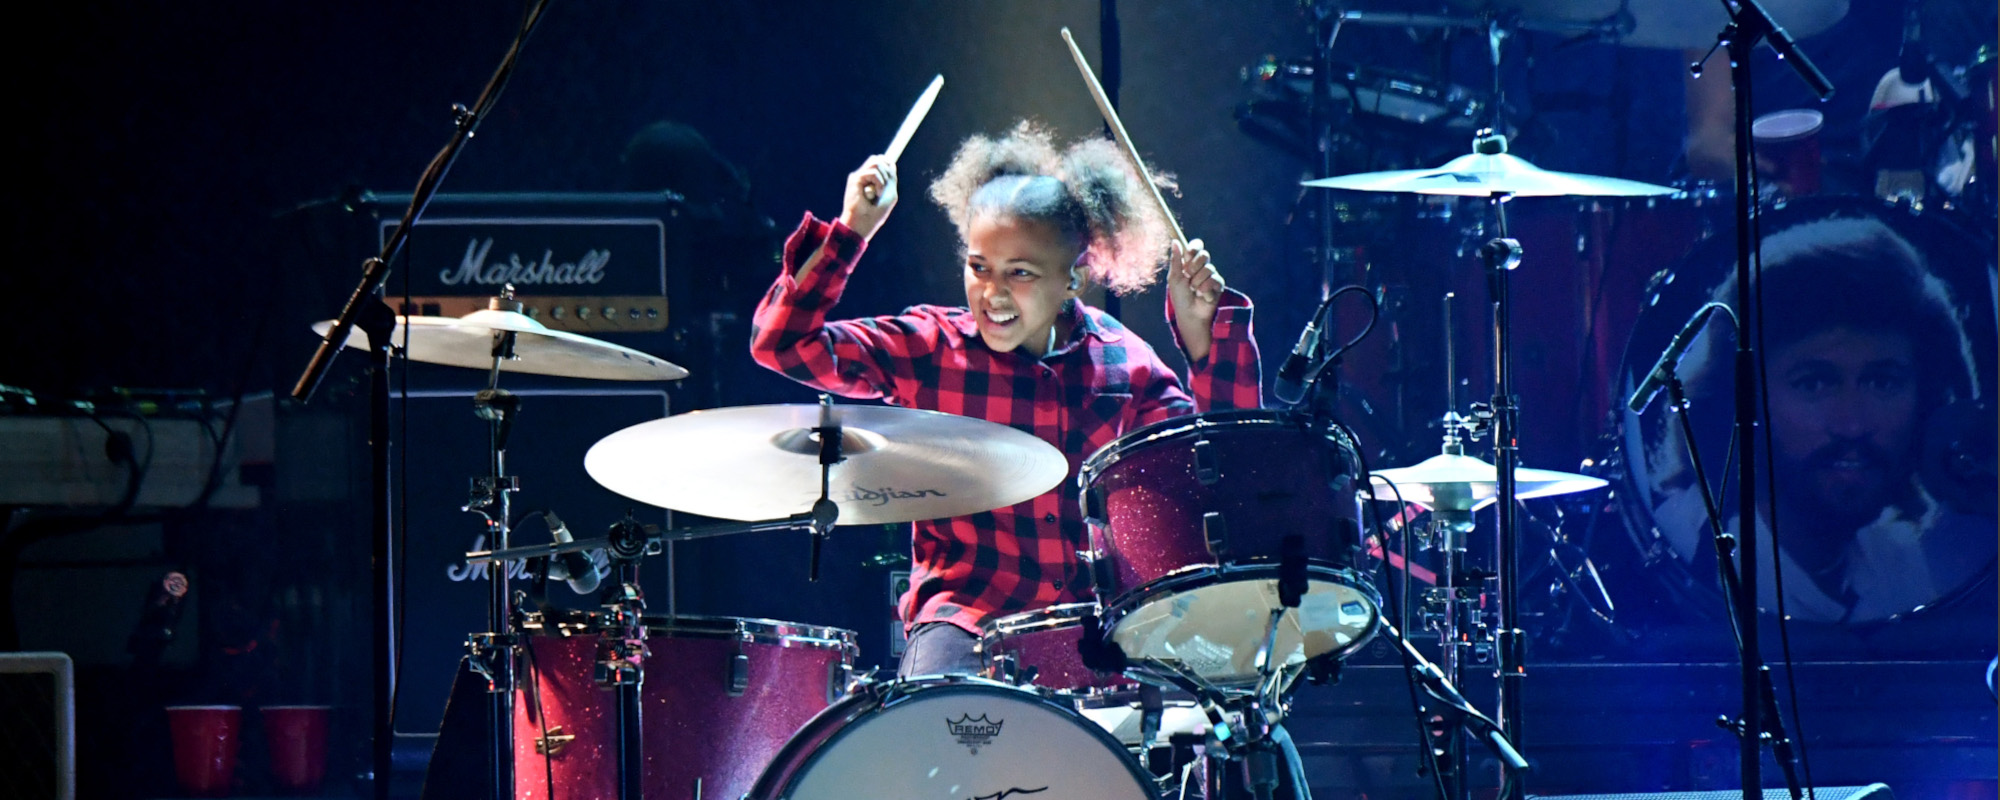 Nandi Bushell Pays Tribute to “Hero” Meg White with Cover of “Seven Nation Army”